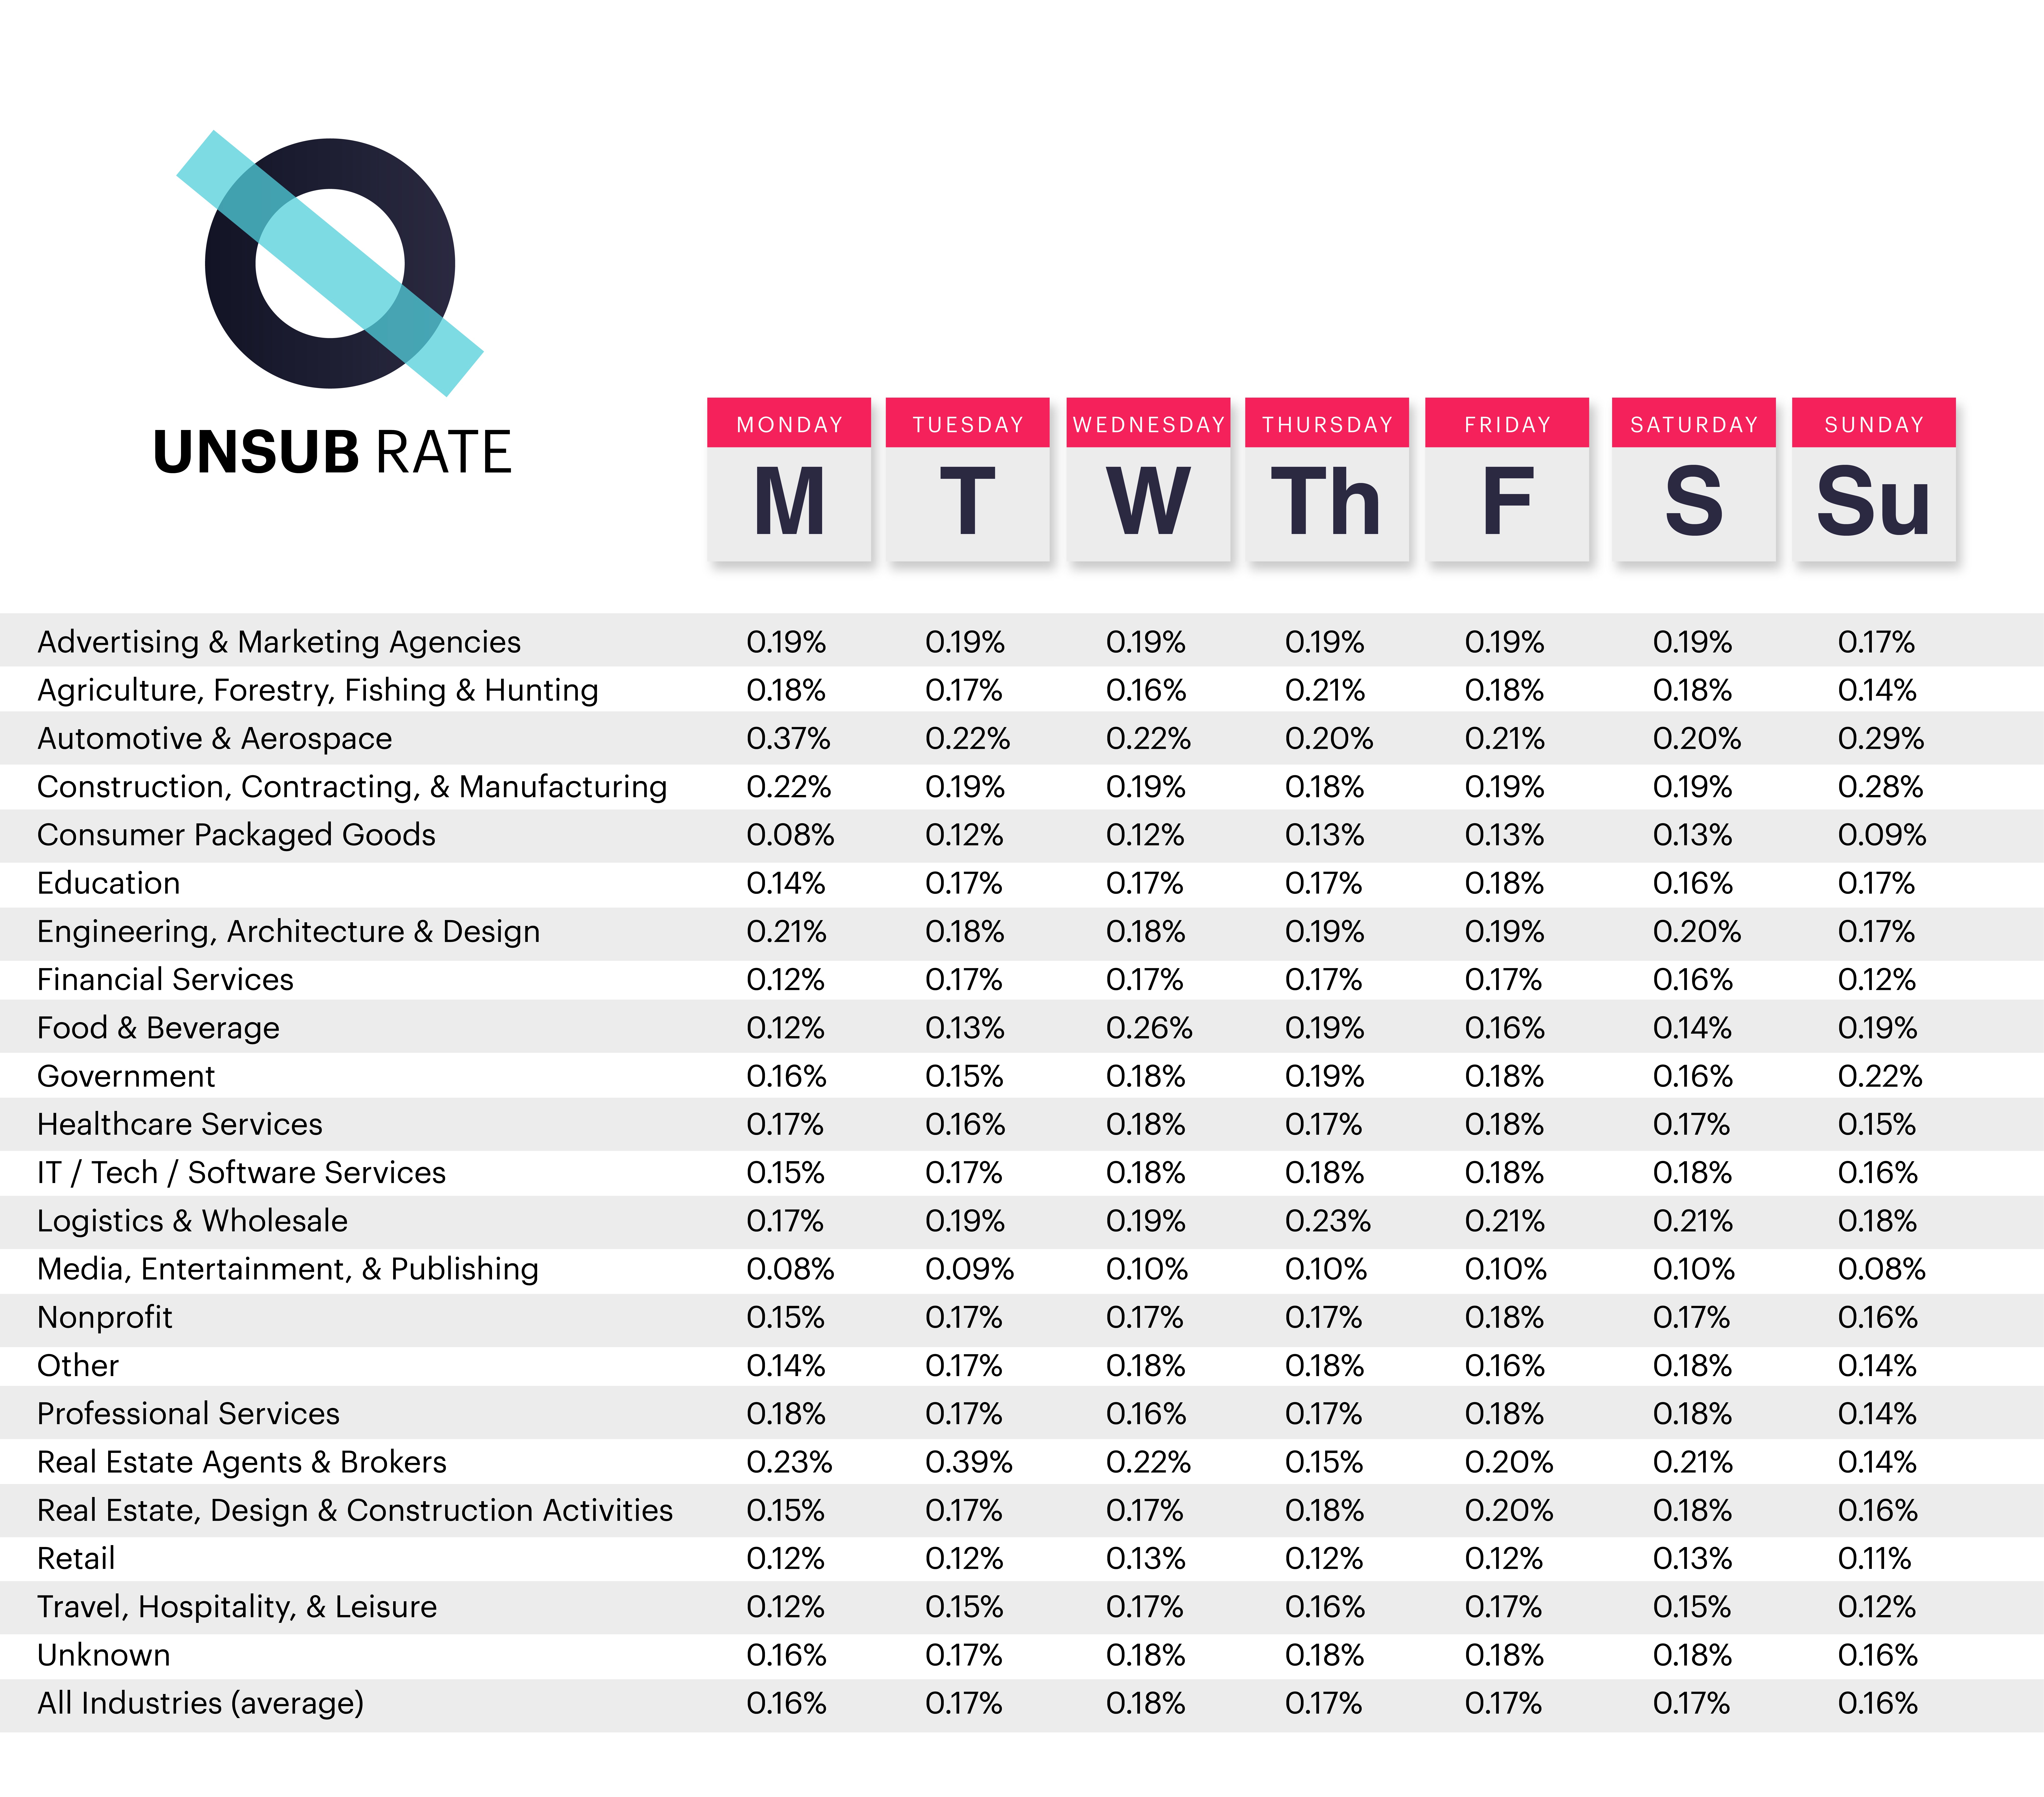 Email unsubscribe rates by industry email benchmarks infographic. This infographic shows industry-specific data and statistics on email unsubscribe rates.